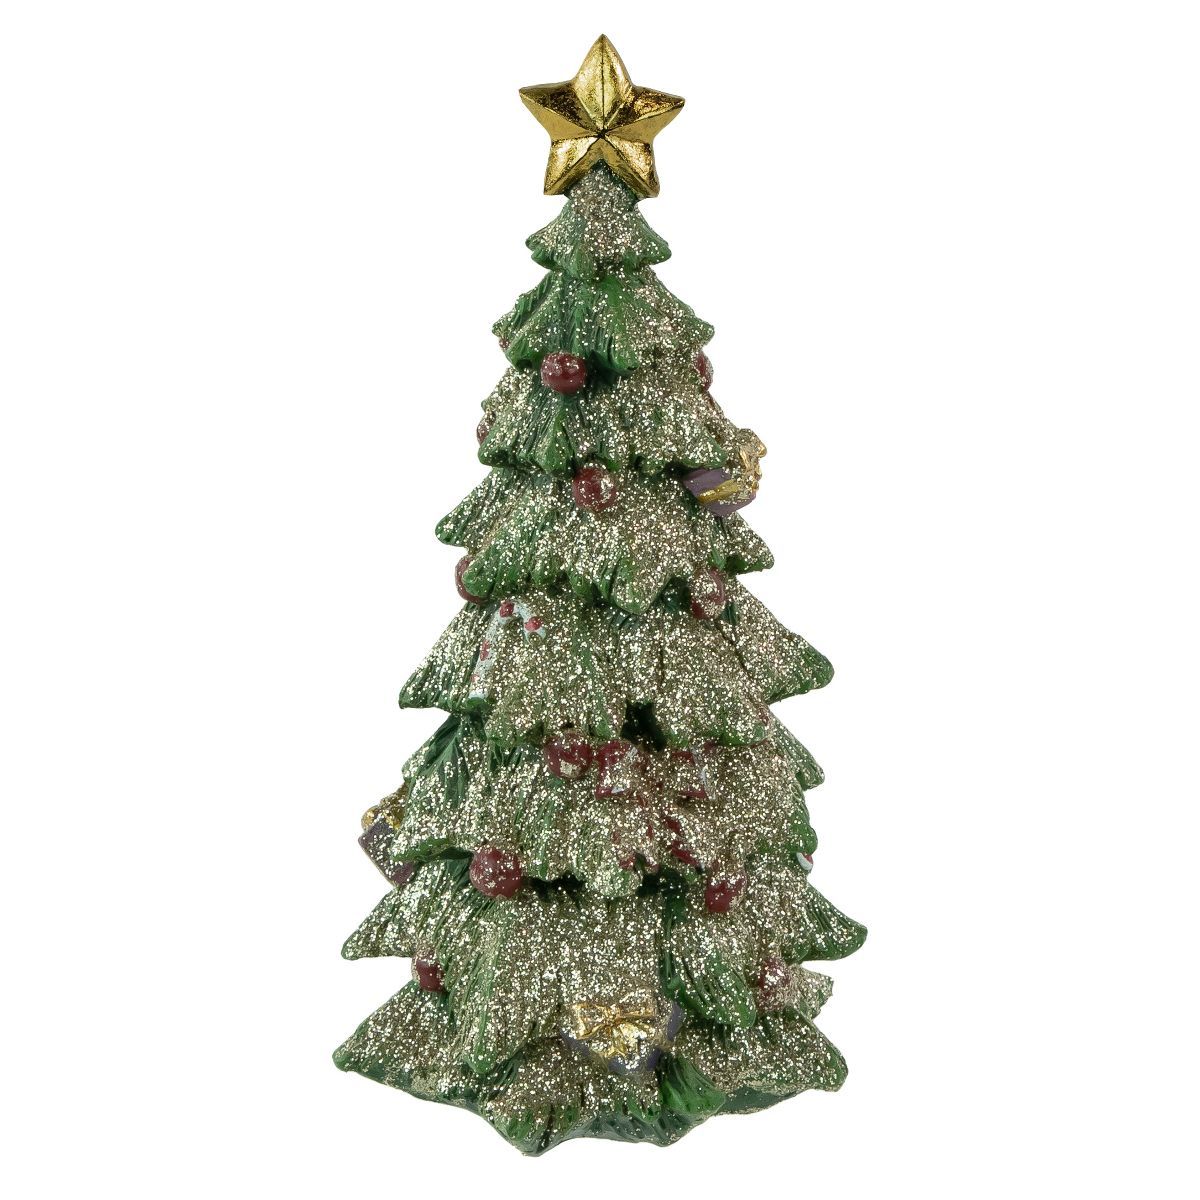 Northlight 6.75" Glittered Christmas Tree With a Star Tabletop Decoration | Target